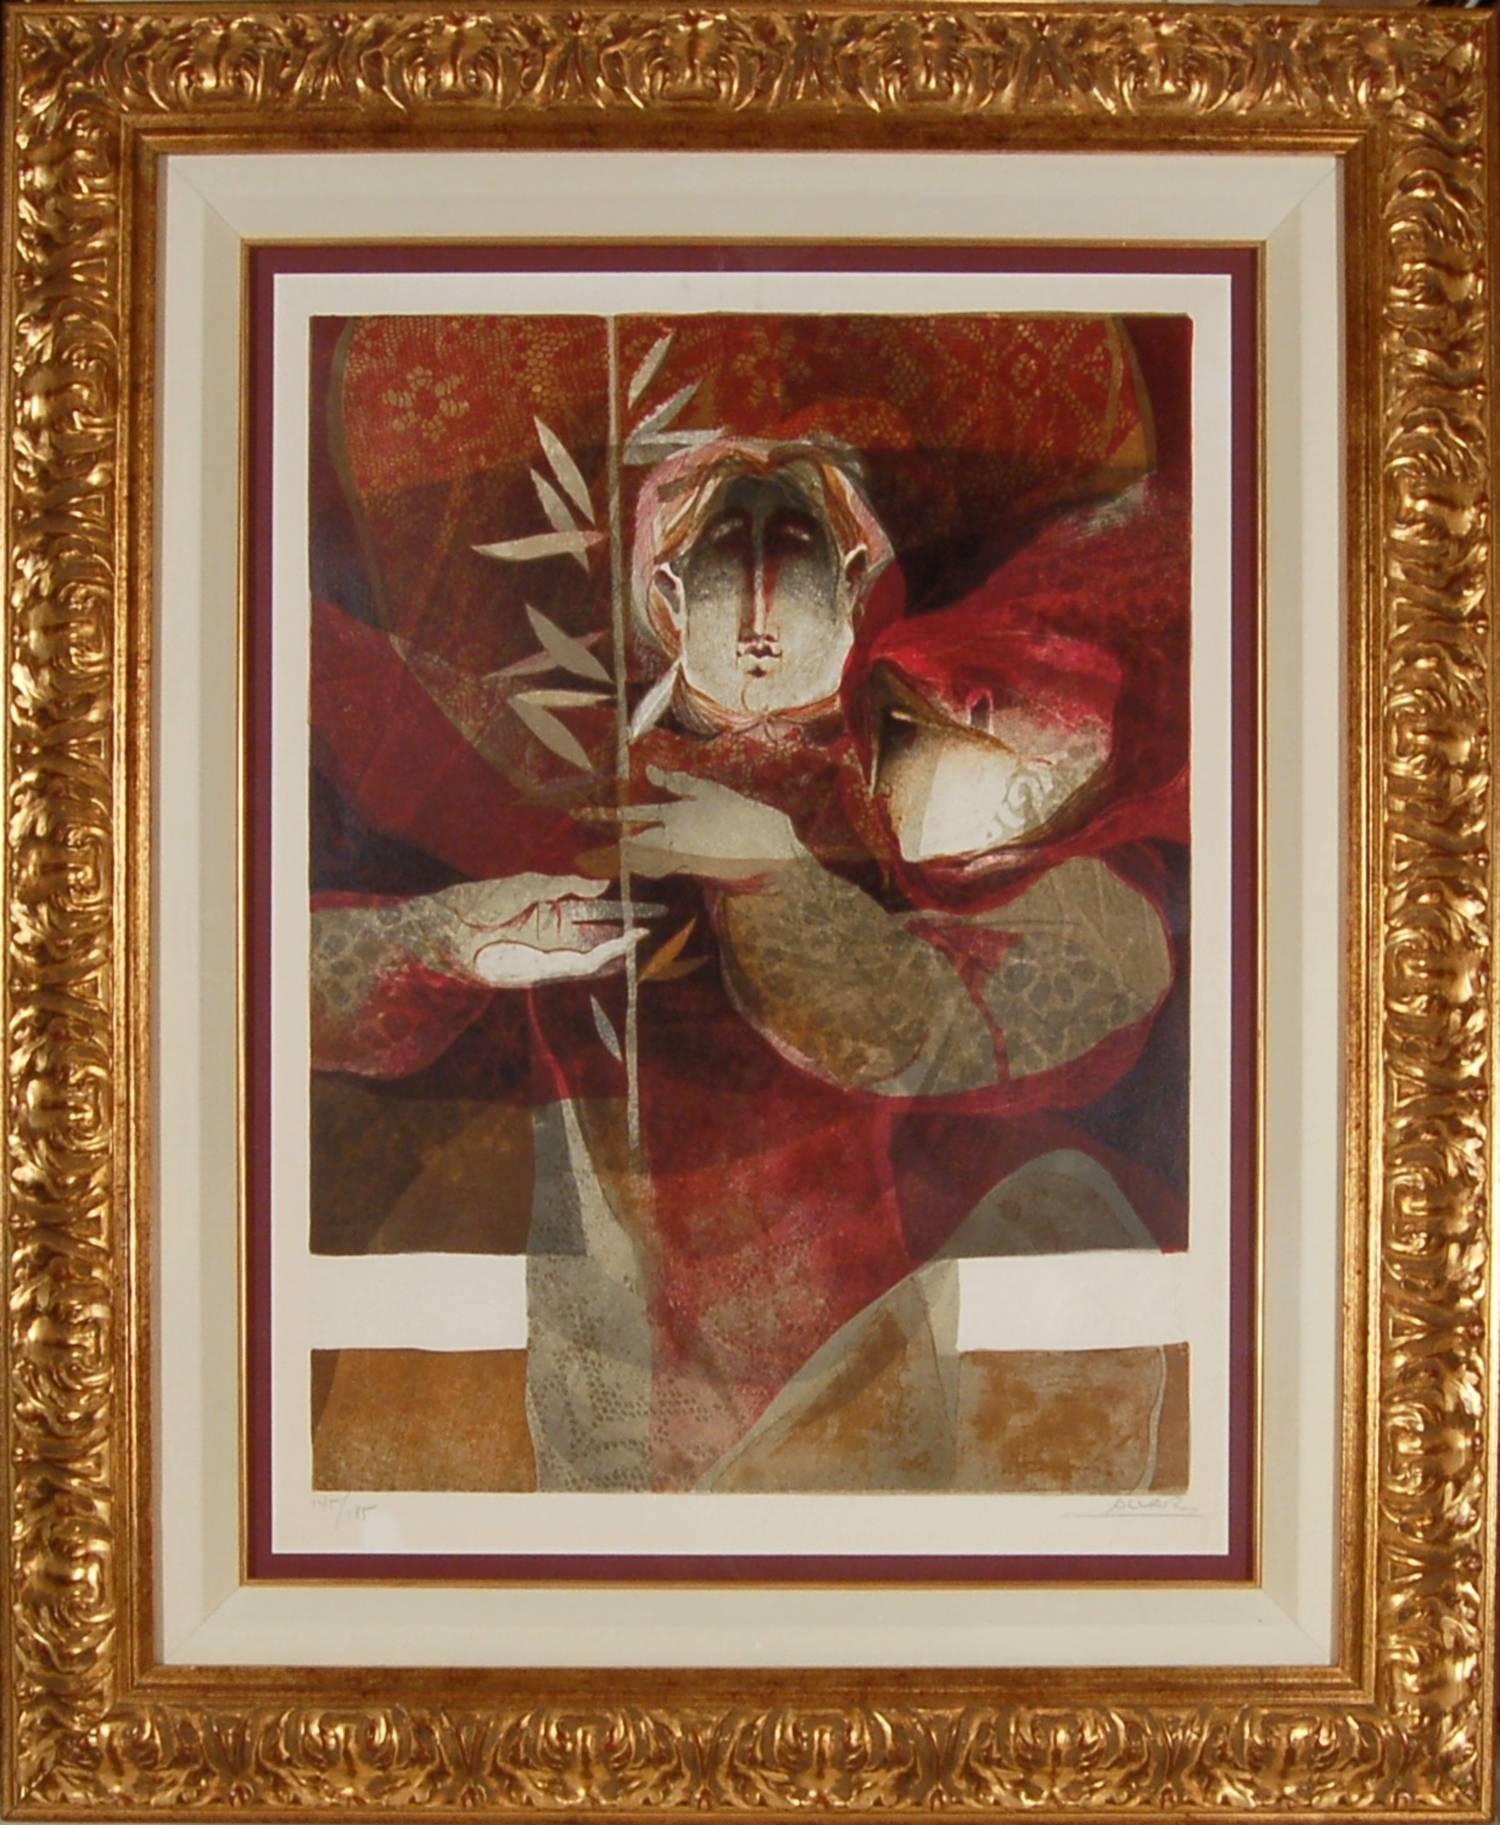 Sunol Alvar Figurative Print - From the, The Barcelona Suite,